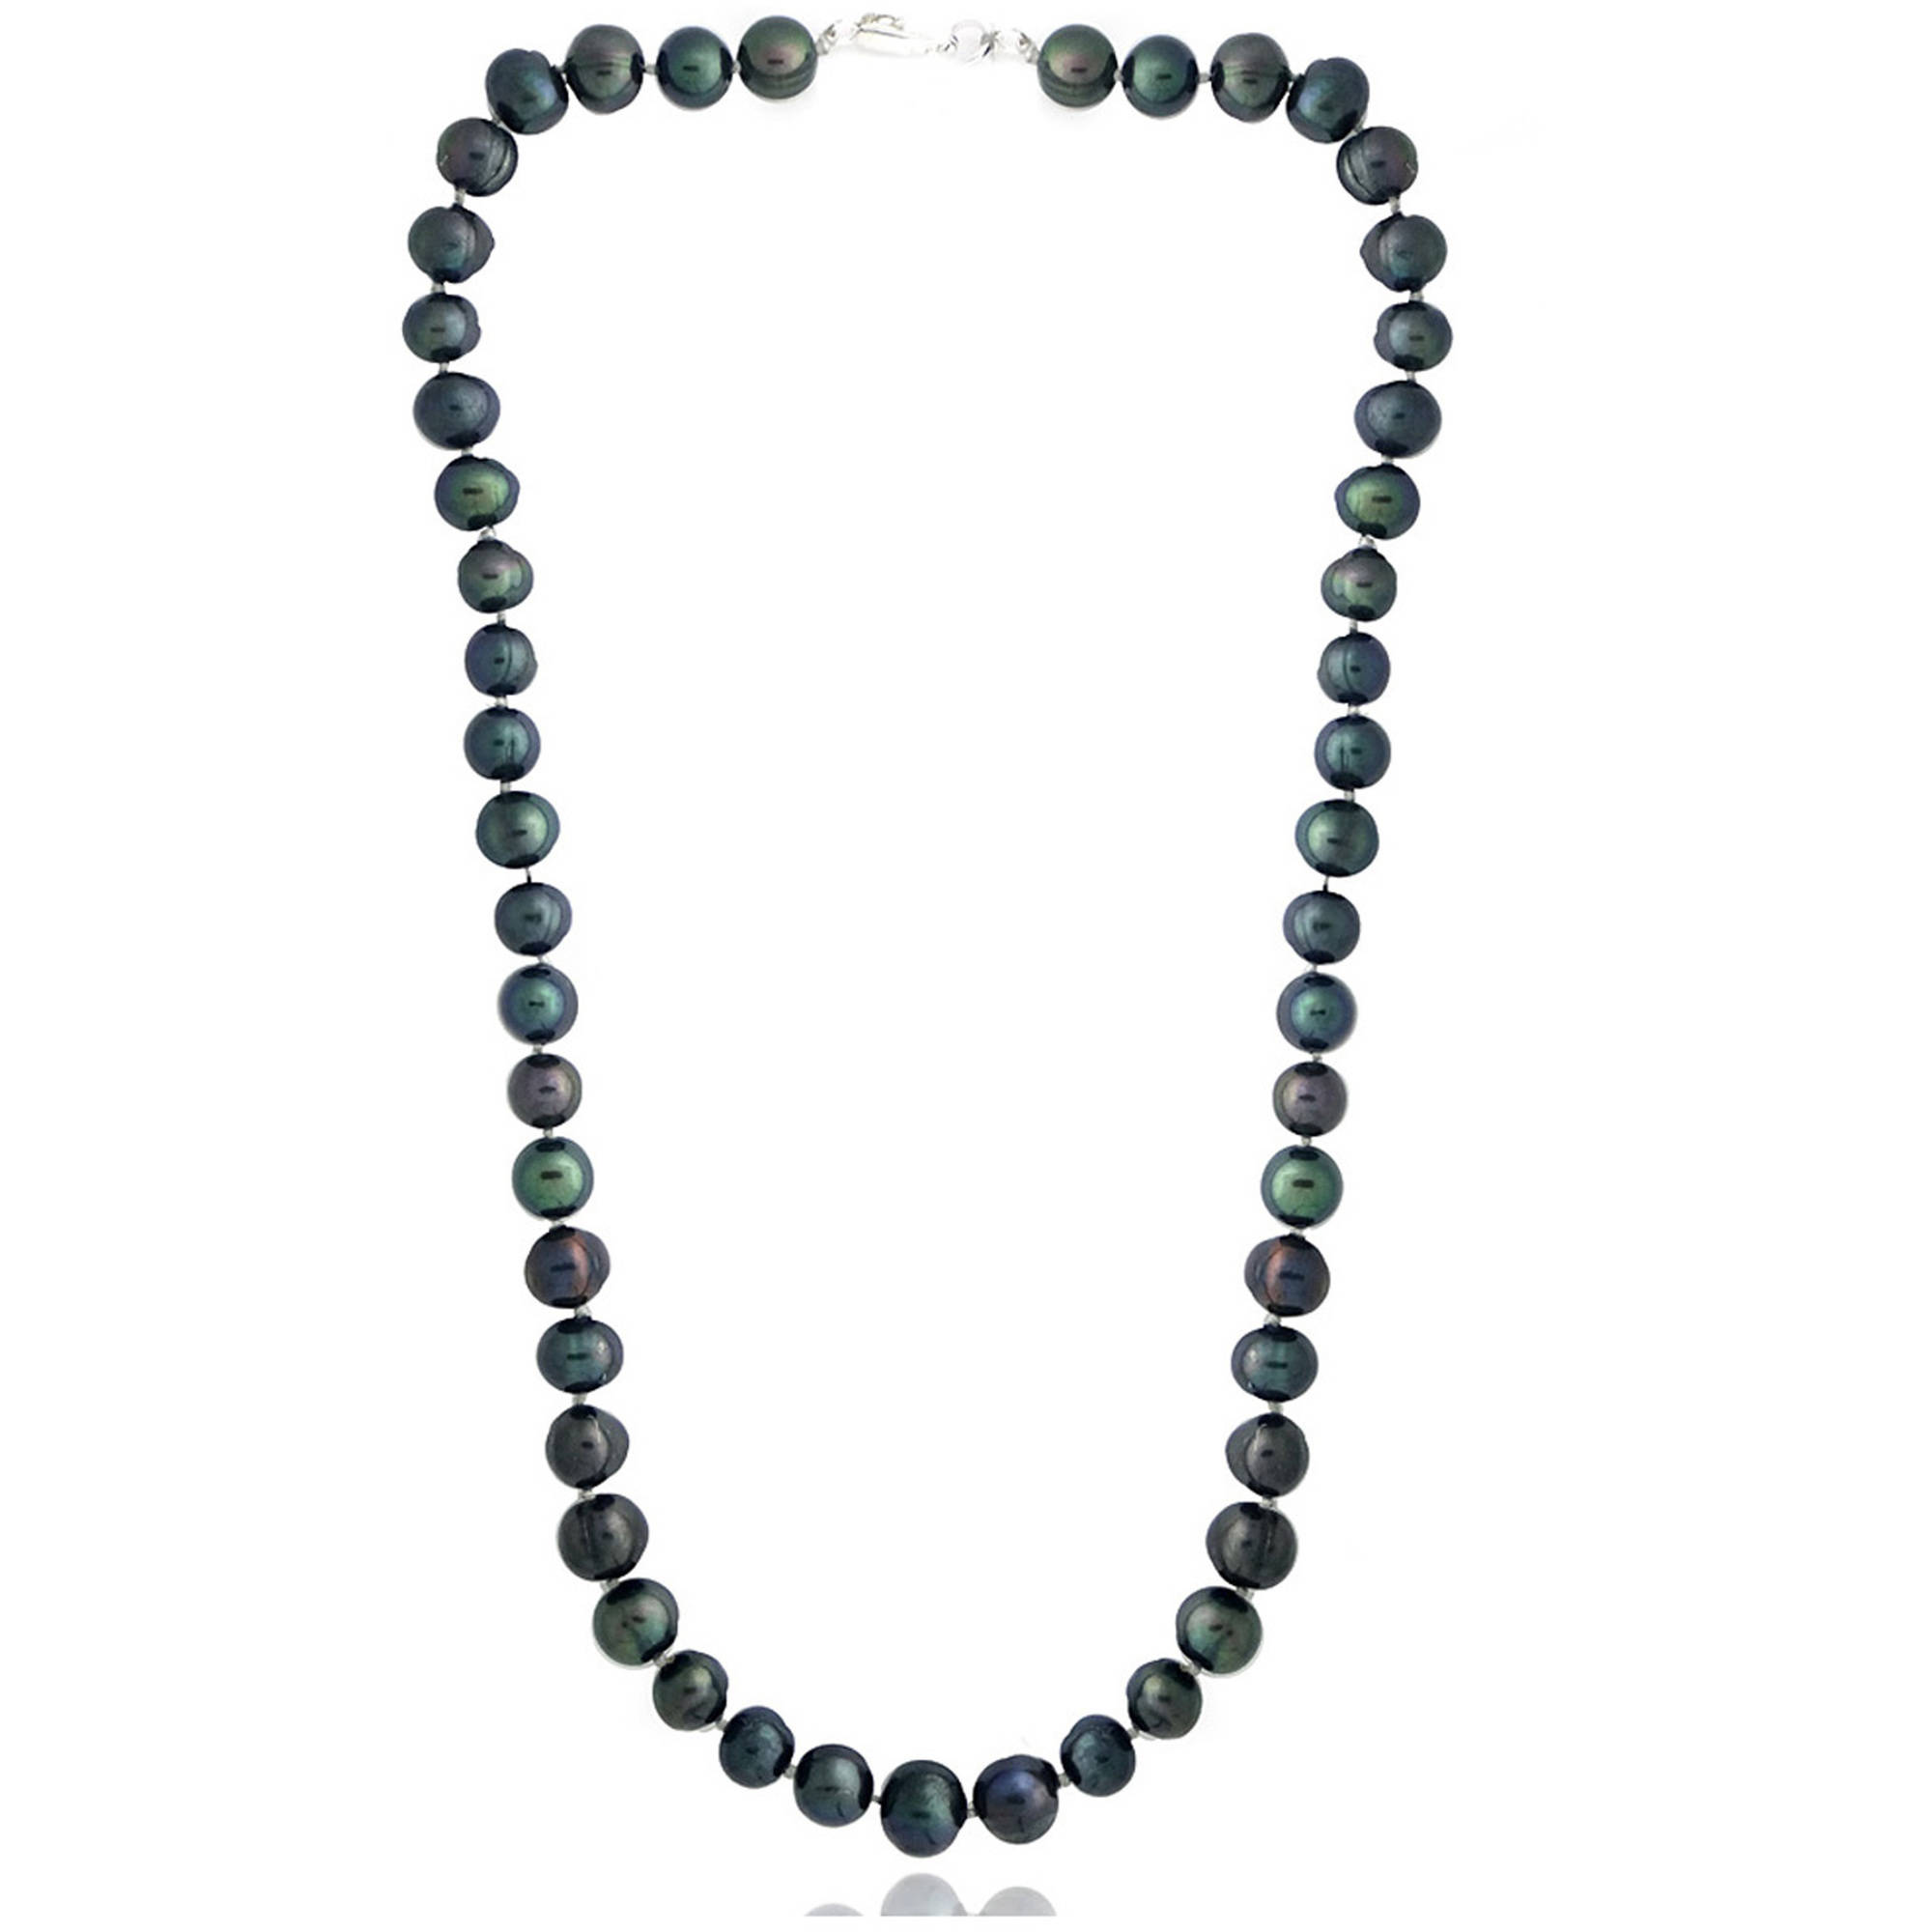 8-9mm Peacock Freshwater Cultured Pearl Necklace, 18" - image 1 of 2